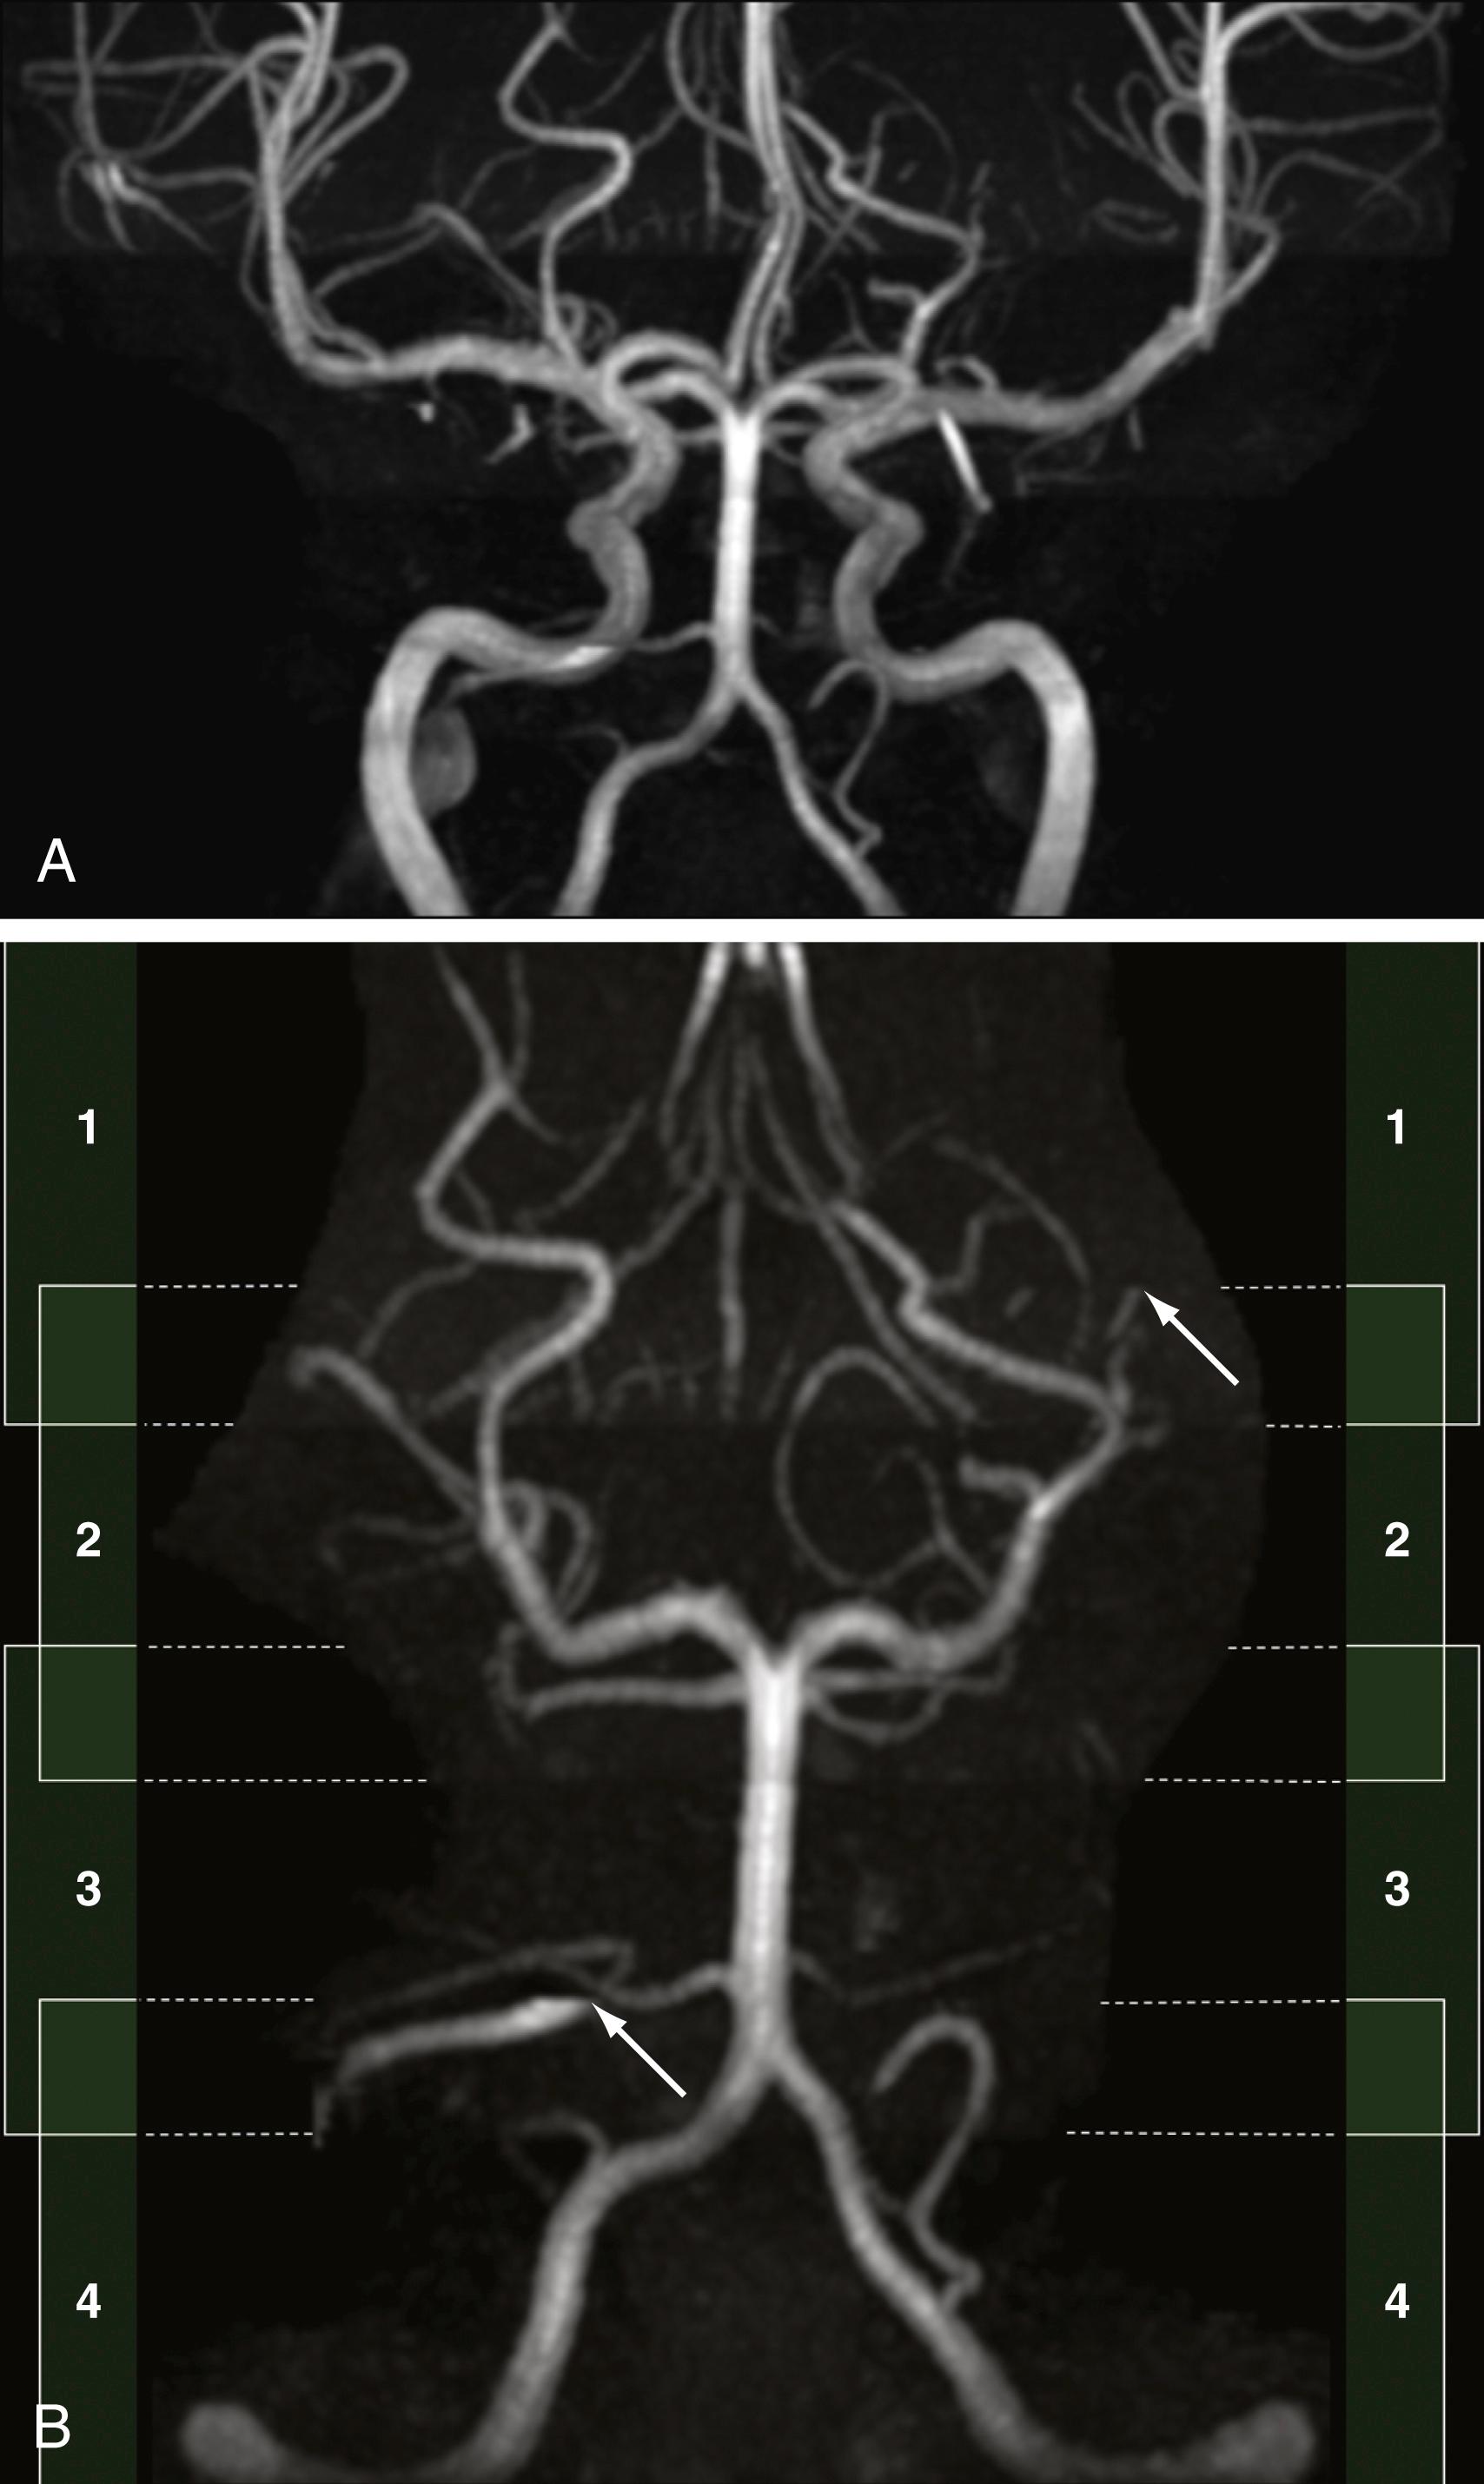 Figure 12.11, Coronal maximum-intensity projections of a three-dimensional time-of-flight MR angiogram (A) and segmented projection of the vertebrobasilar system only (B). The sequences are ordinarily acquired by using multiple overlapping slabs to increase the conspicuity of vessels. Where slabs overlap (indicated schematically by bright green reflecting slabs 1 plus 2, or 2 plus 3, or 3 plus 4), one sees better signal but also an abrupt increase in venous signal ( arrows in B). The viewer should be aware of this slab-related artifact when interpreting maximum-intensity projection images as this may create the appearance of focal areas of increased conspicuity of normal venous structures, which should not be confused with pathologic vascular malformations.